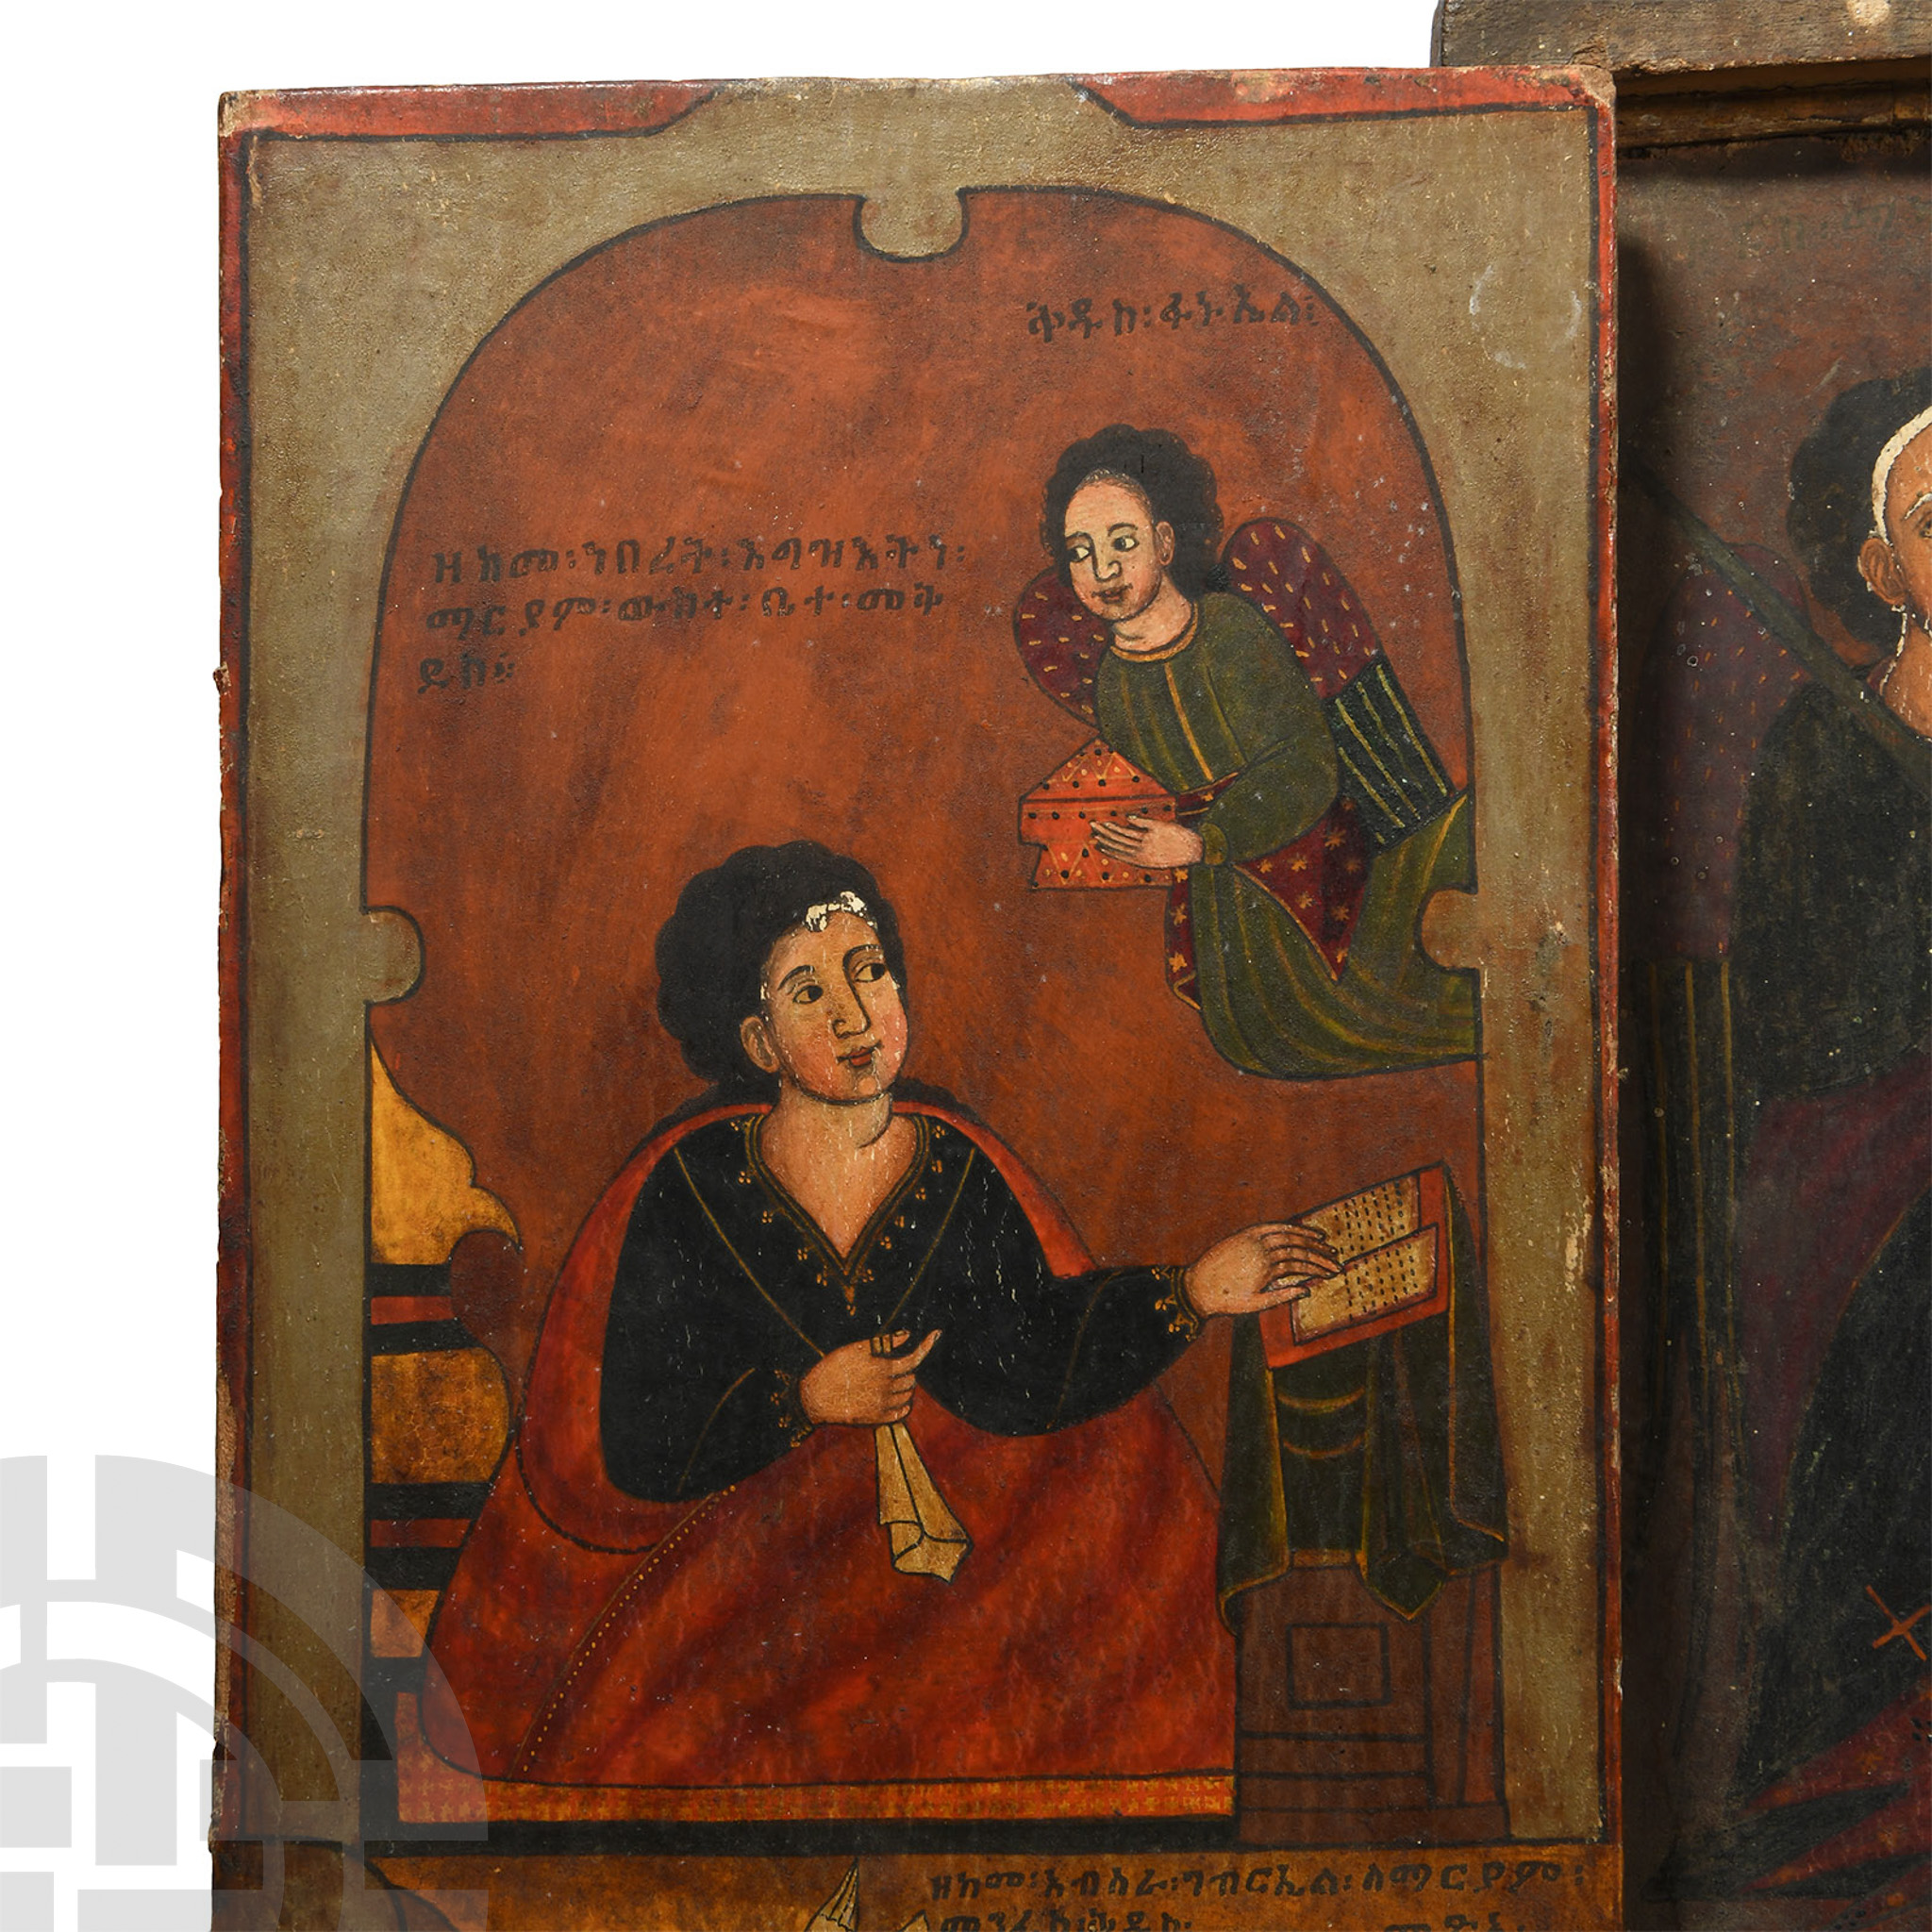 Large Ethiopian Triptych Icon with the Virgin and Child - Image 2 of 6